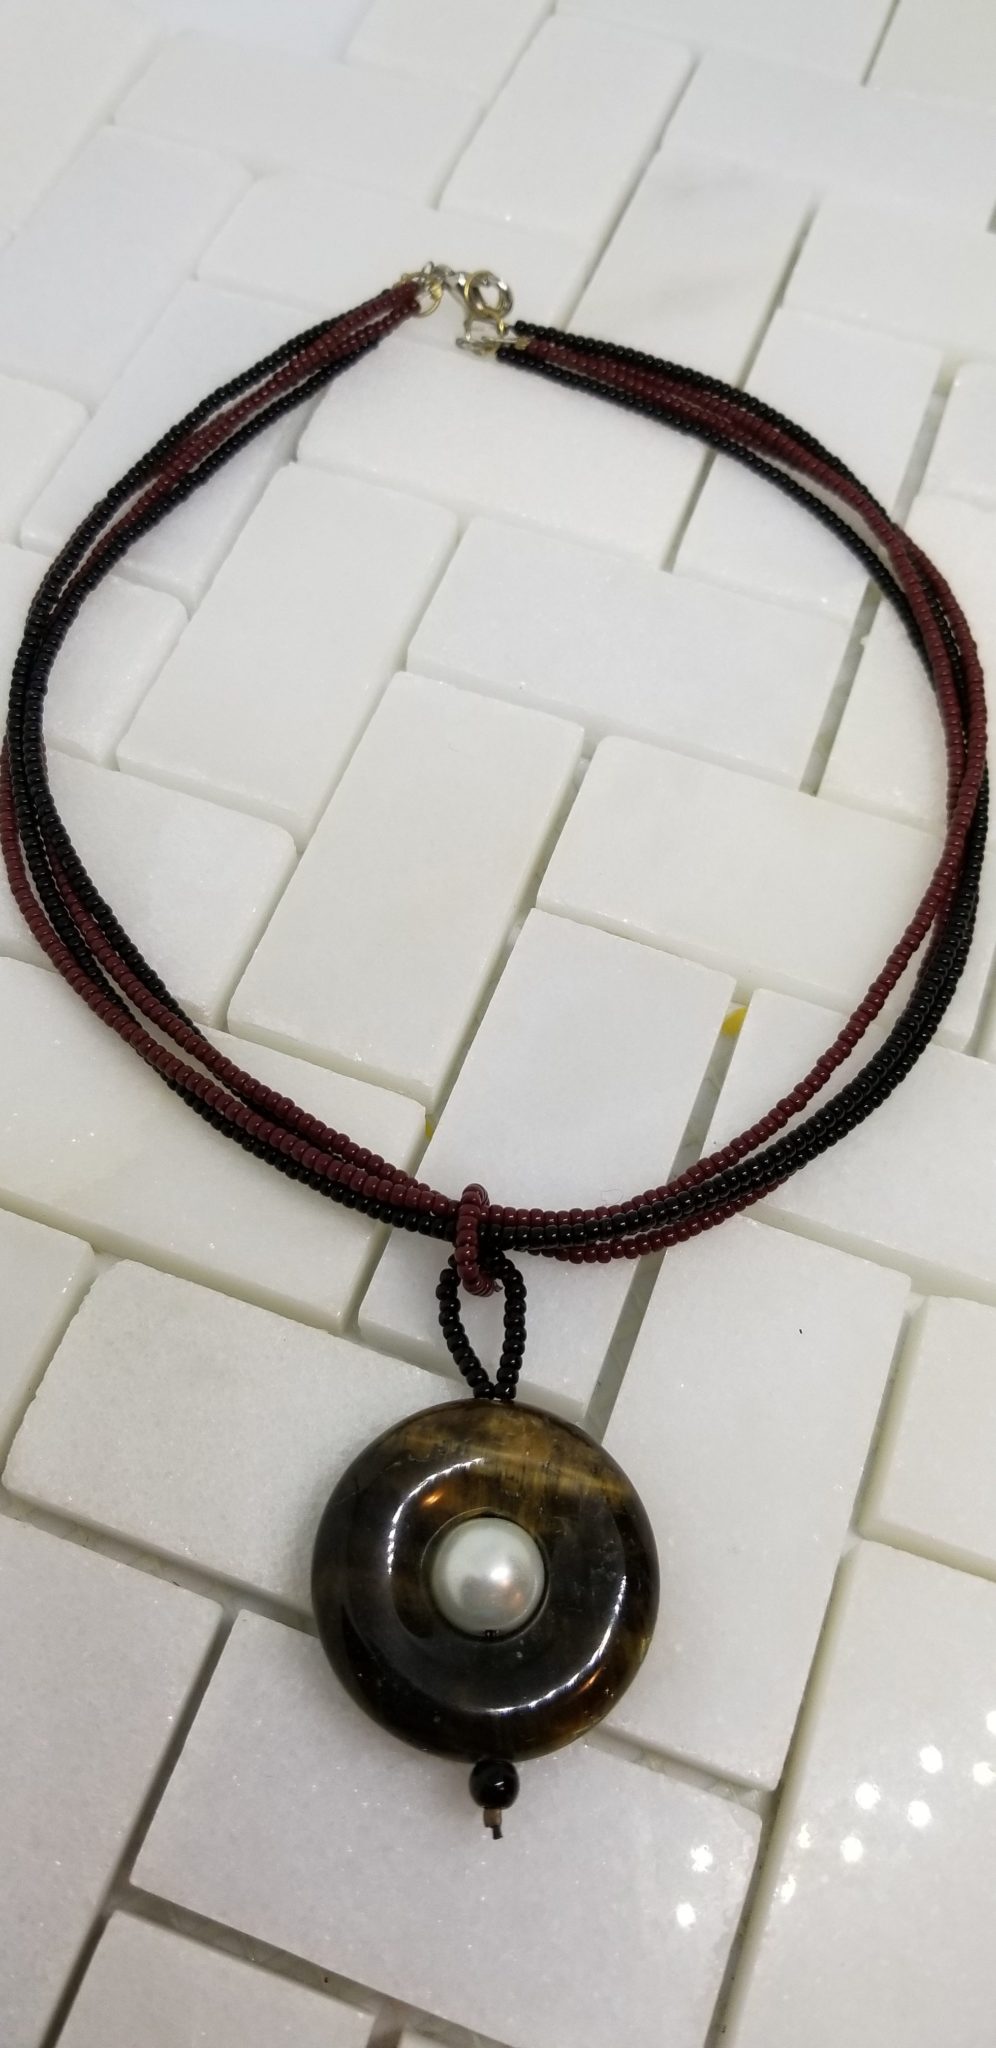 Tiger eye pendant with stringed chain